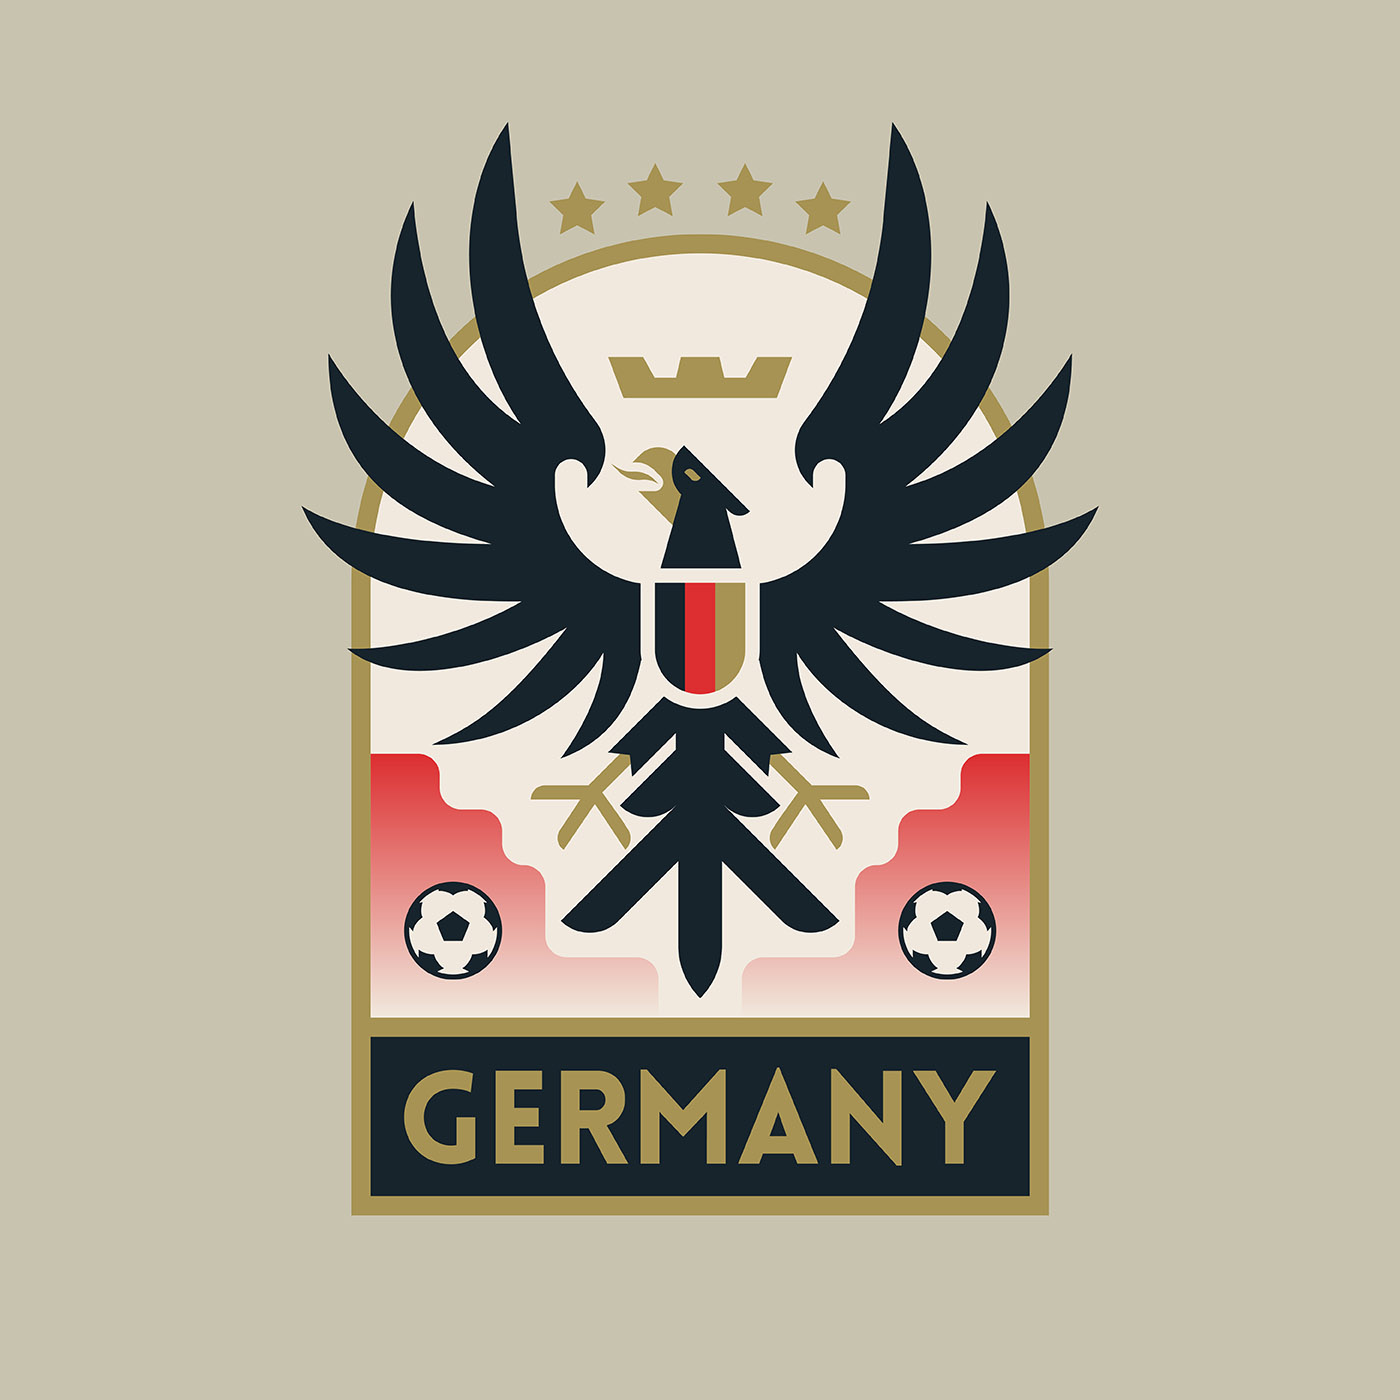 Germany World Cup Soccer Badges 220557 - Download Free Vectors, Clipart ...